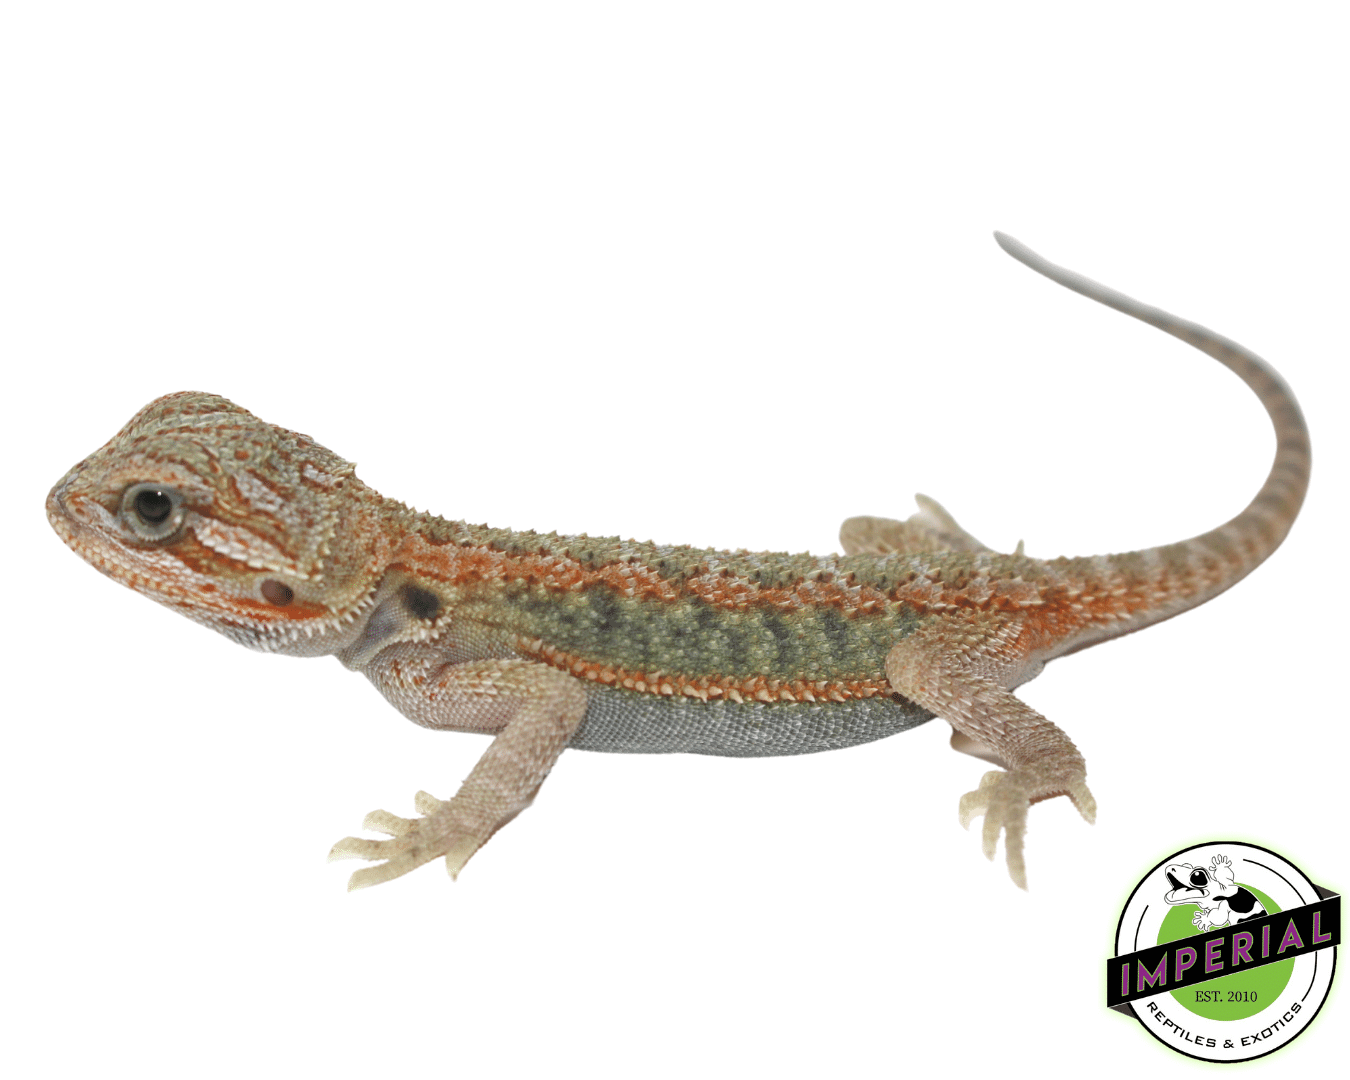 hypo translucent bearded dragon for sale, buy reptiles online